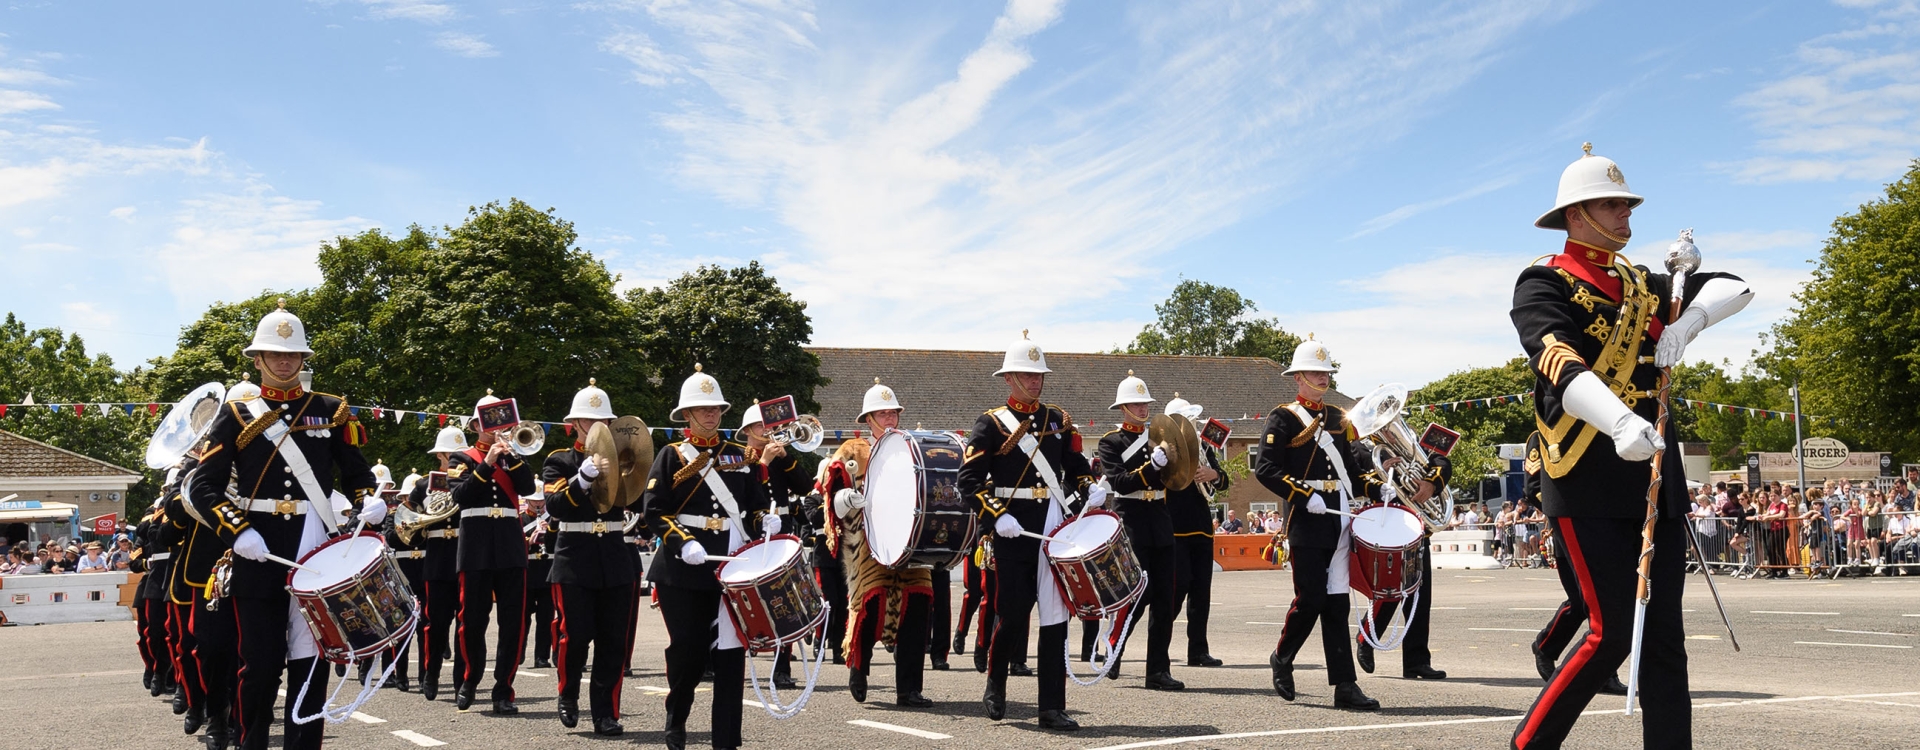 HMS collingwood open day 